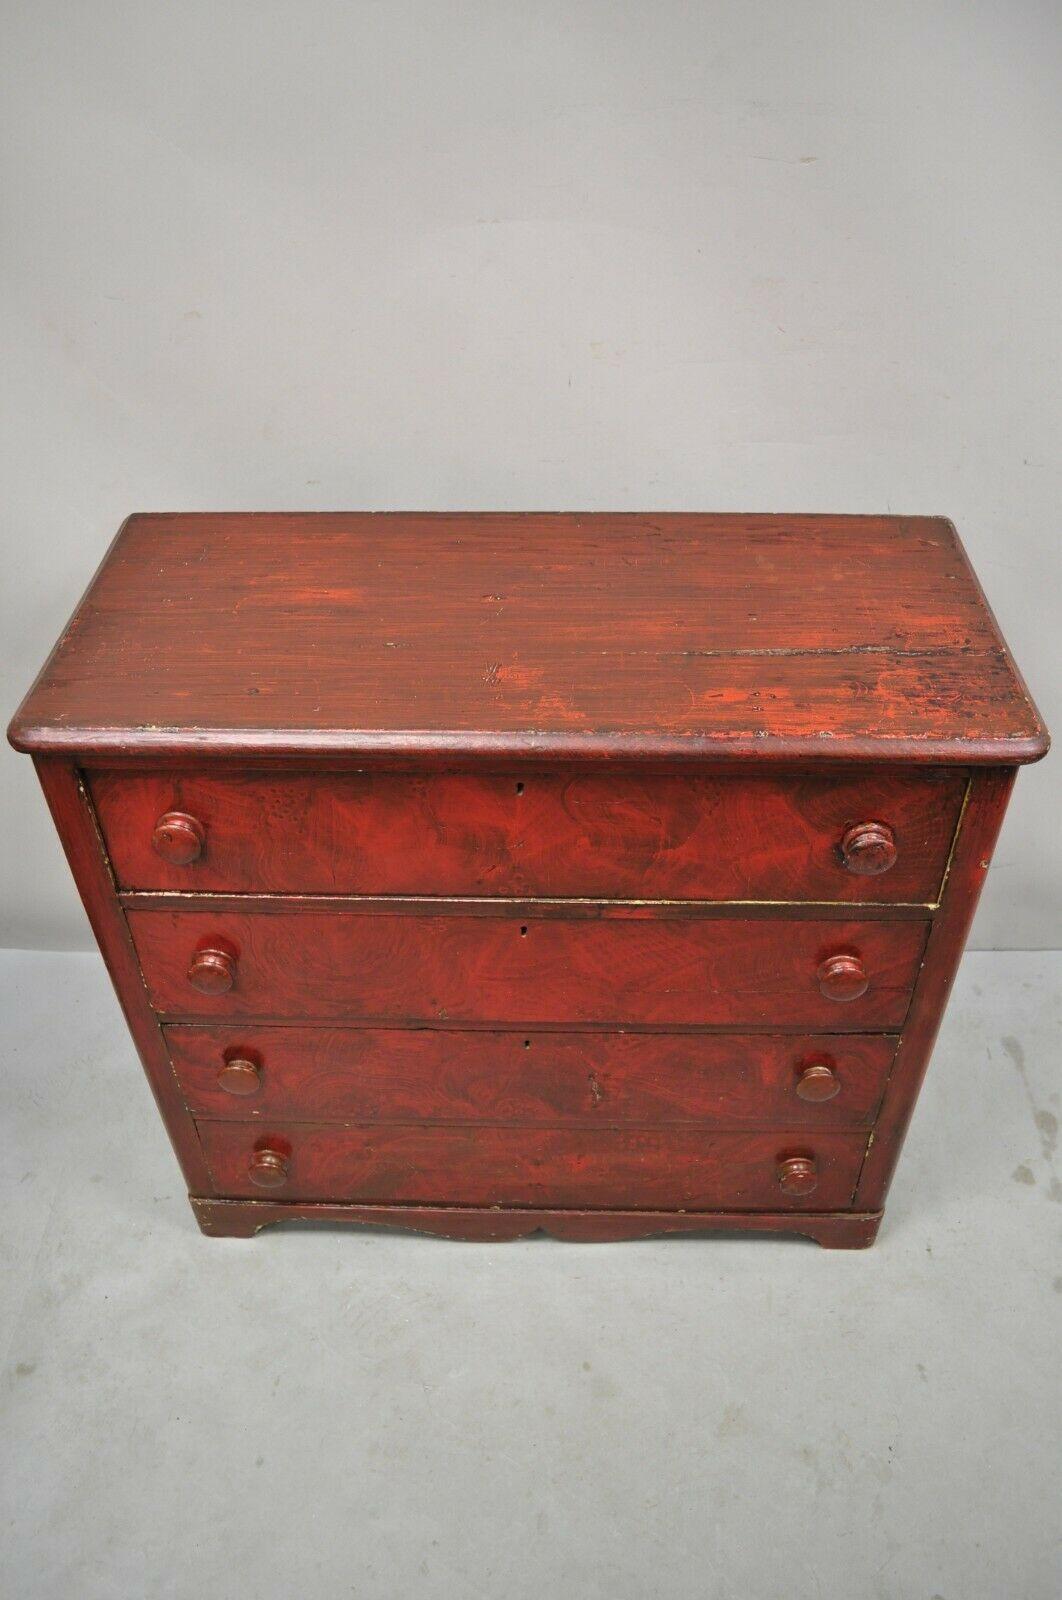 19th C Antique primitive red grain painted 4 drawer chest of drawers dresser. 
 Item features red faux grain painted finish, round wooden drawer pulls, panel back, 4 dovetailed drawers, very nice antique item. Circa 19th century. Measurements: 35